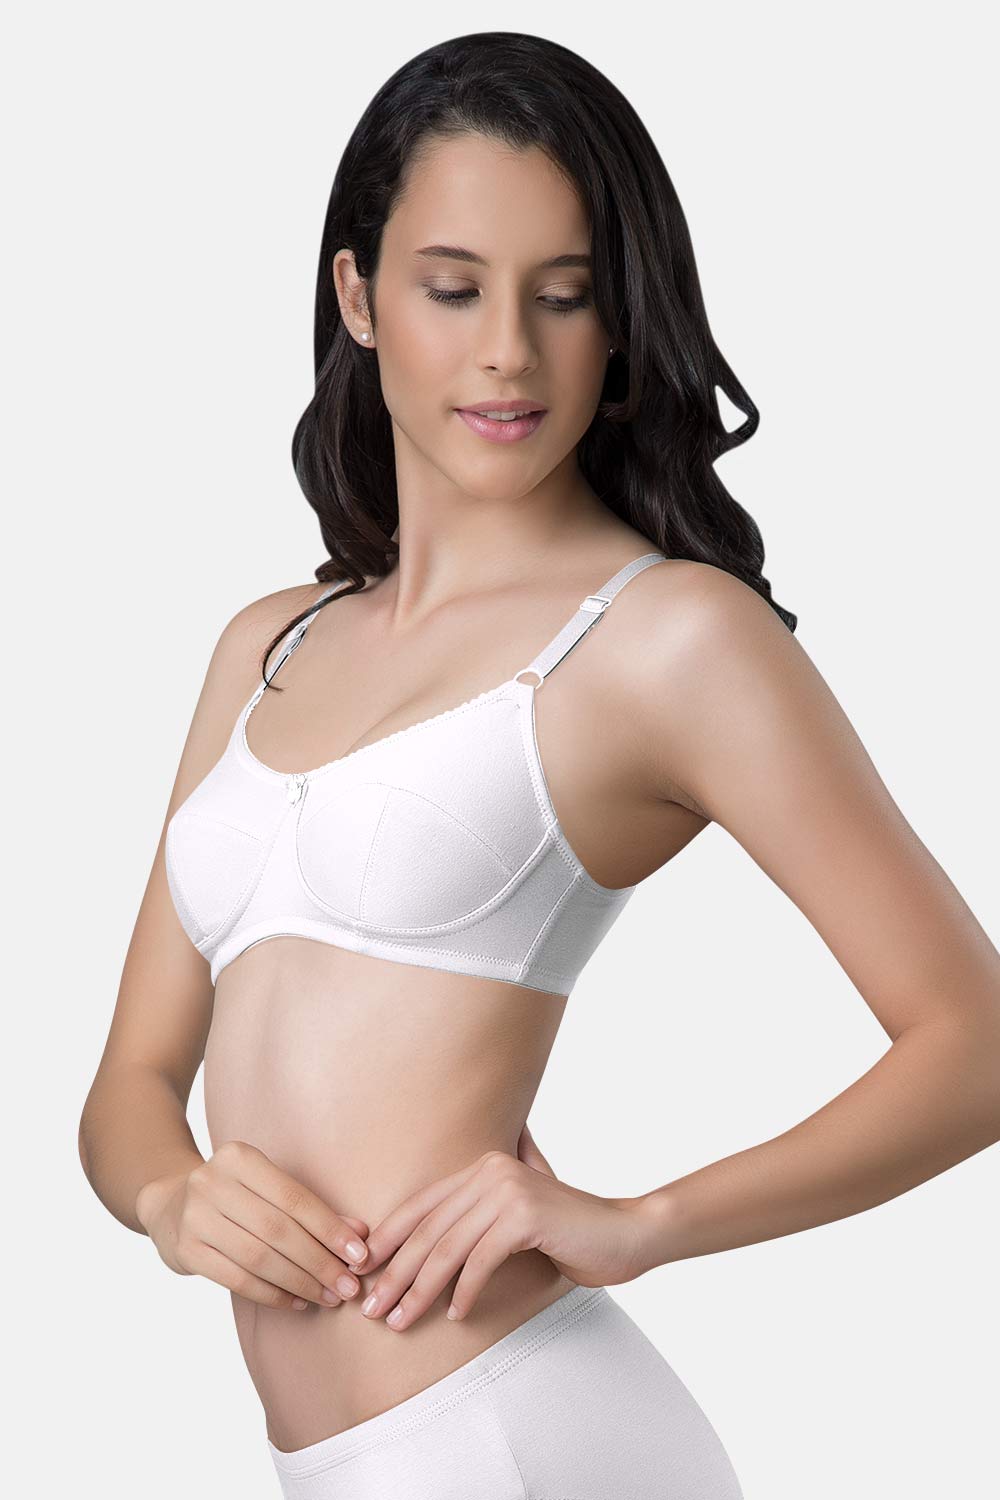 Cotton Stretchable Stuff Bra/Blouse/Brazier/Inner Wear Non Padded